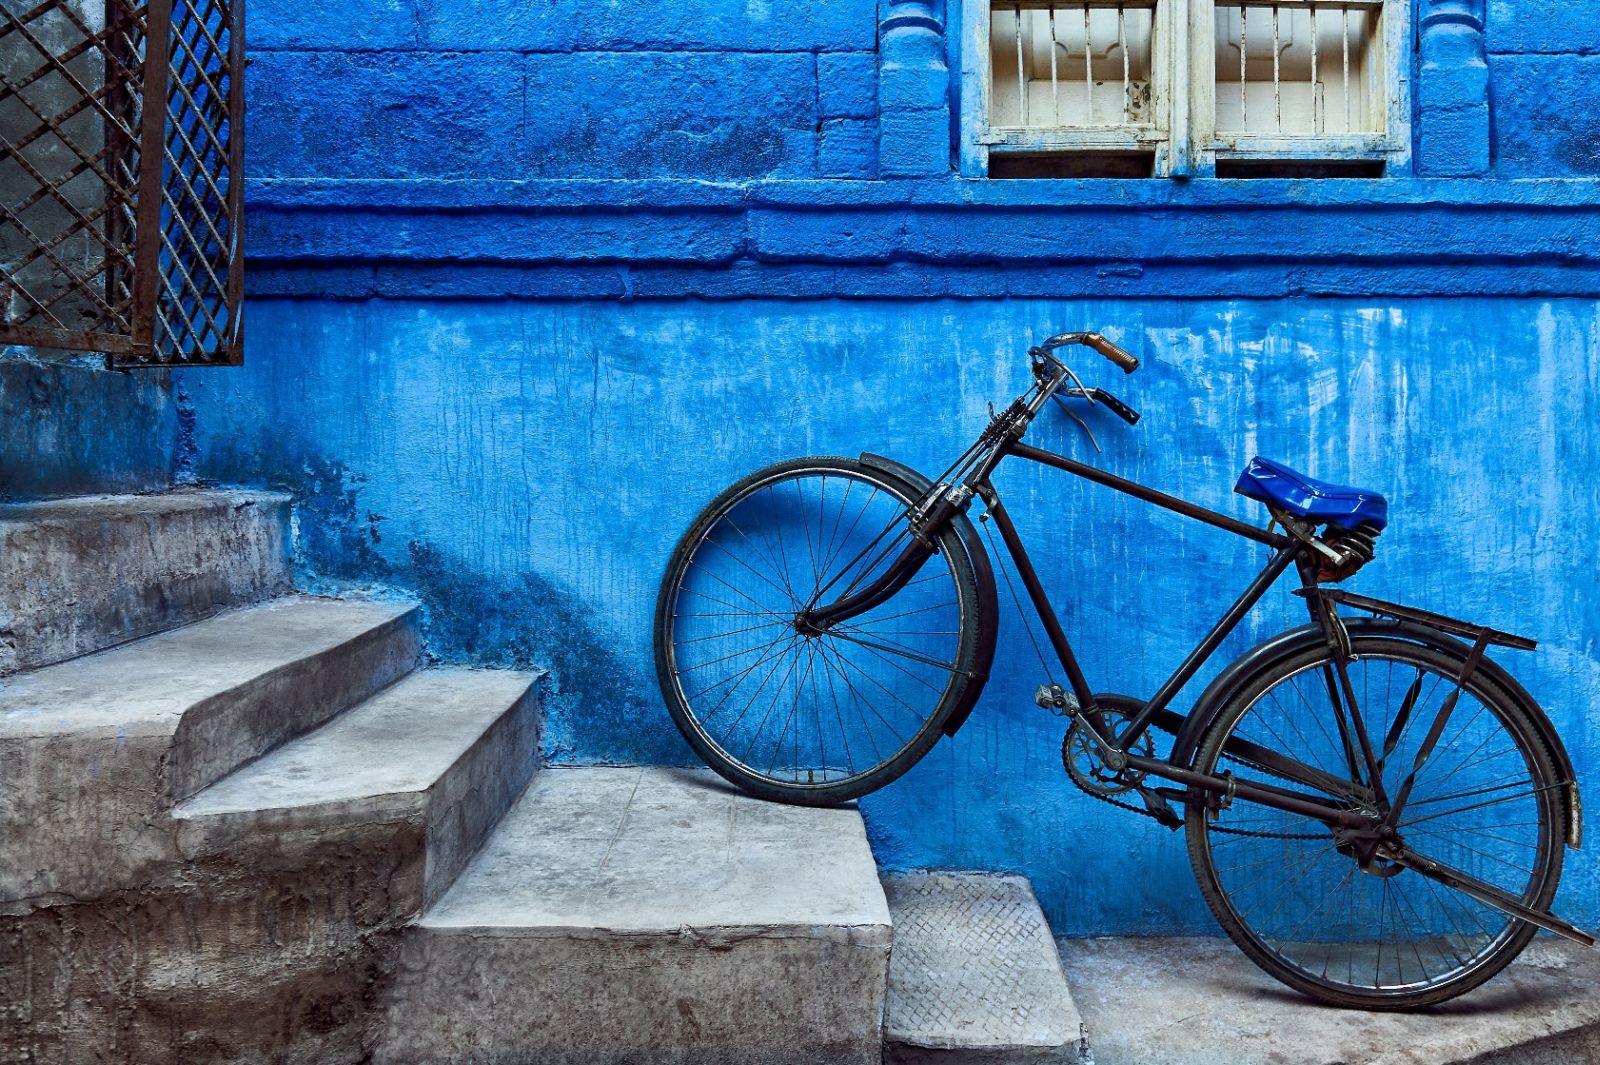 A bike with its front wheel on a step leaning up against a blue wall in Jodhpur in India